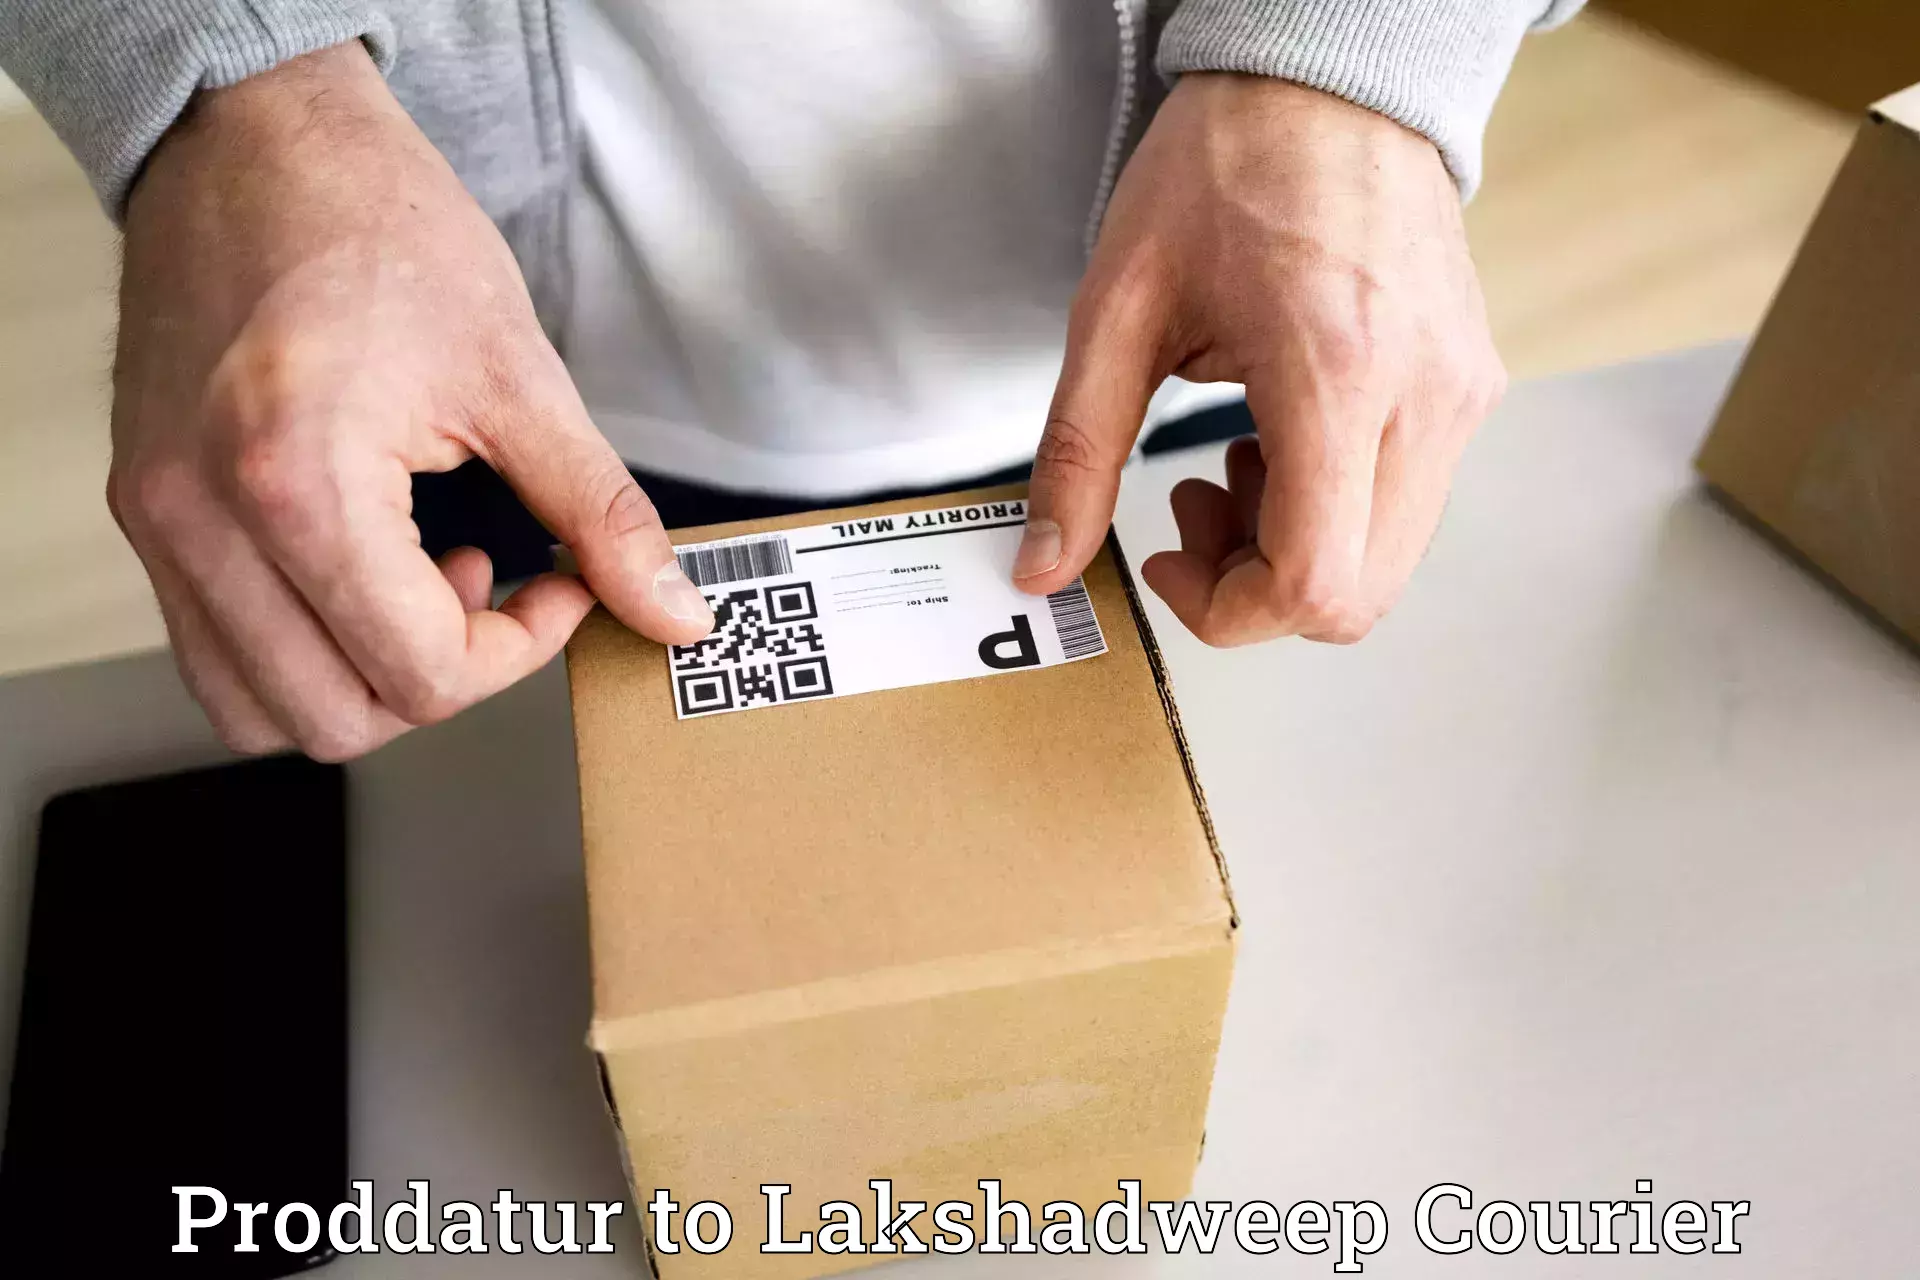 Courier service partnerships Proddatur to Lakshadweep